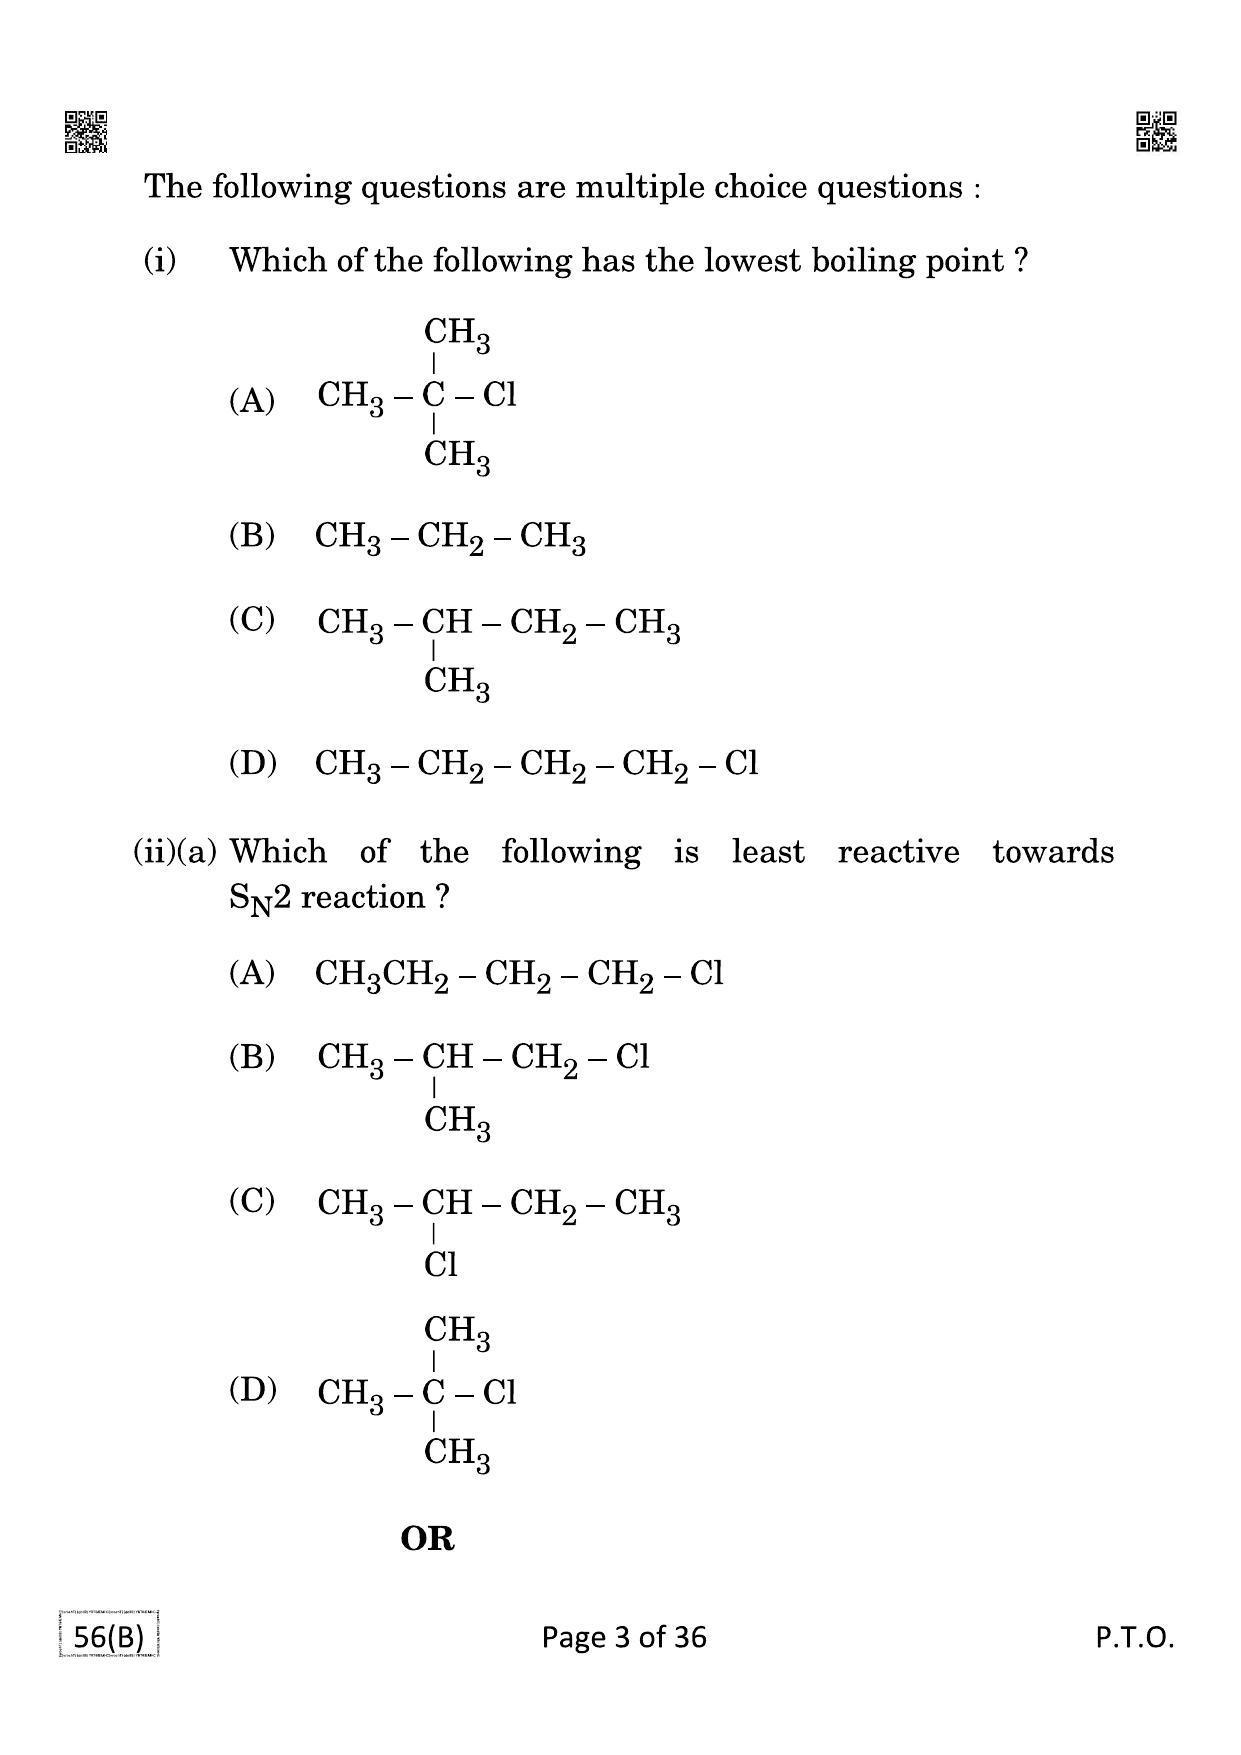 CBSE Class 12 QP_043_CHEMISTRY_FOR_BLIND_CANDIDATES 2021 Compartment Question Paper - Page 3